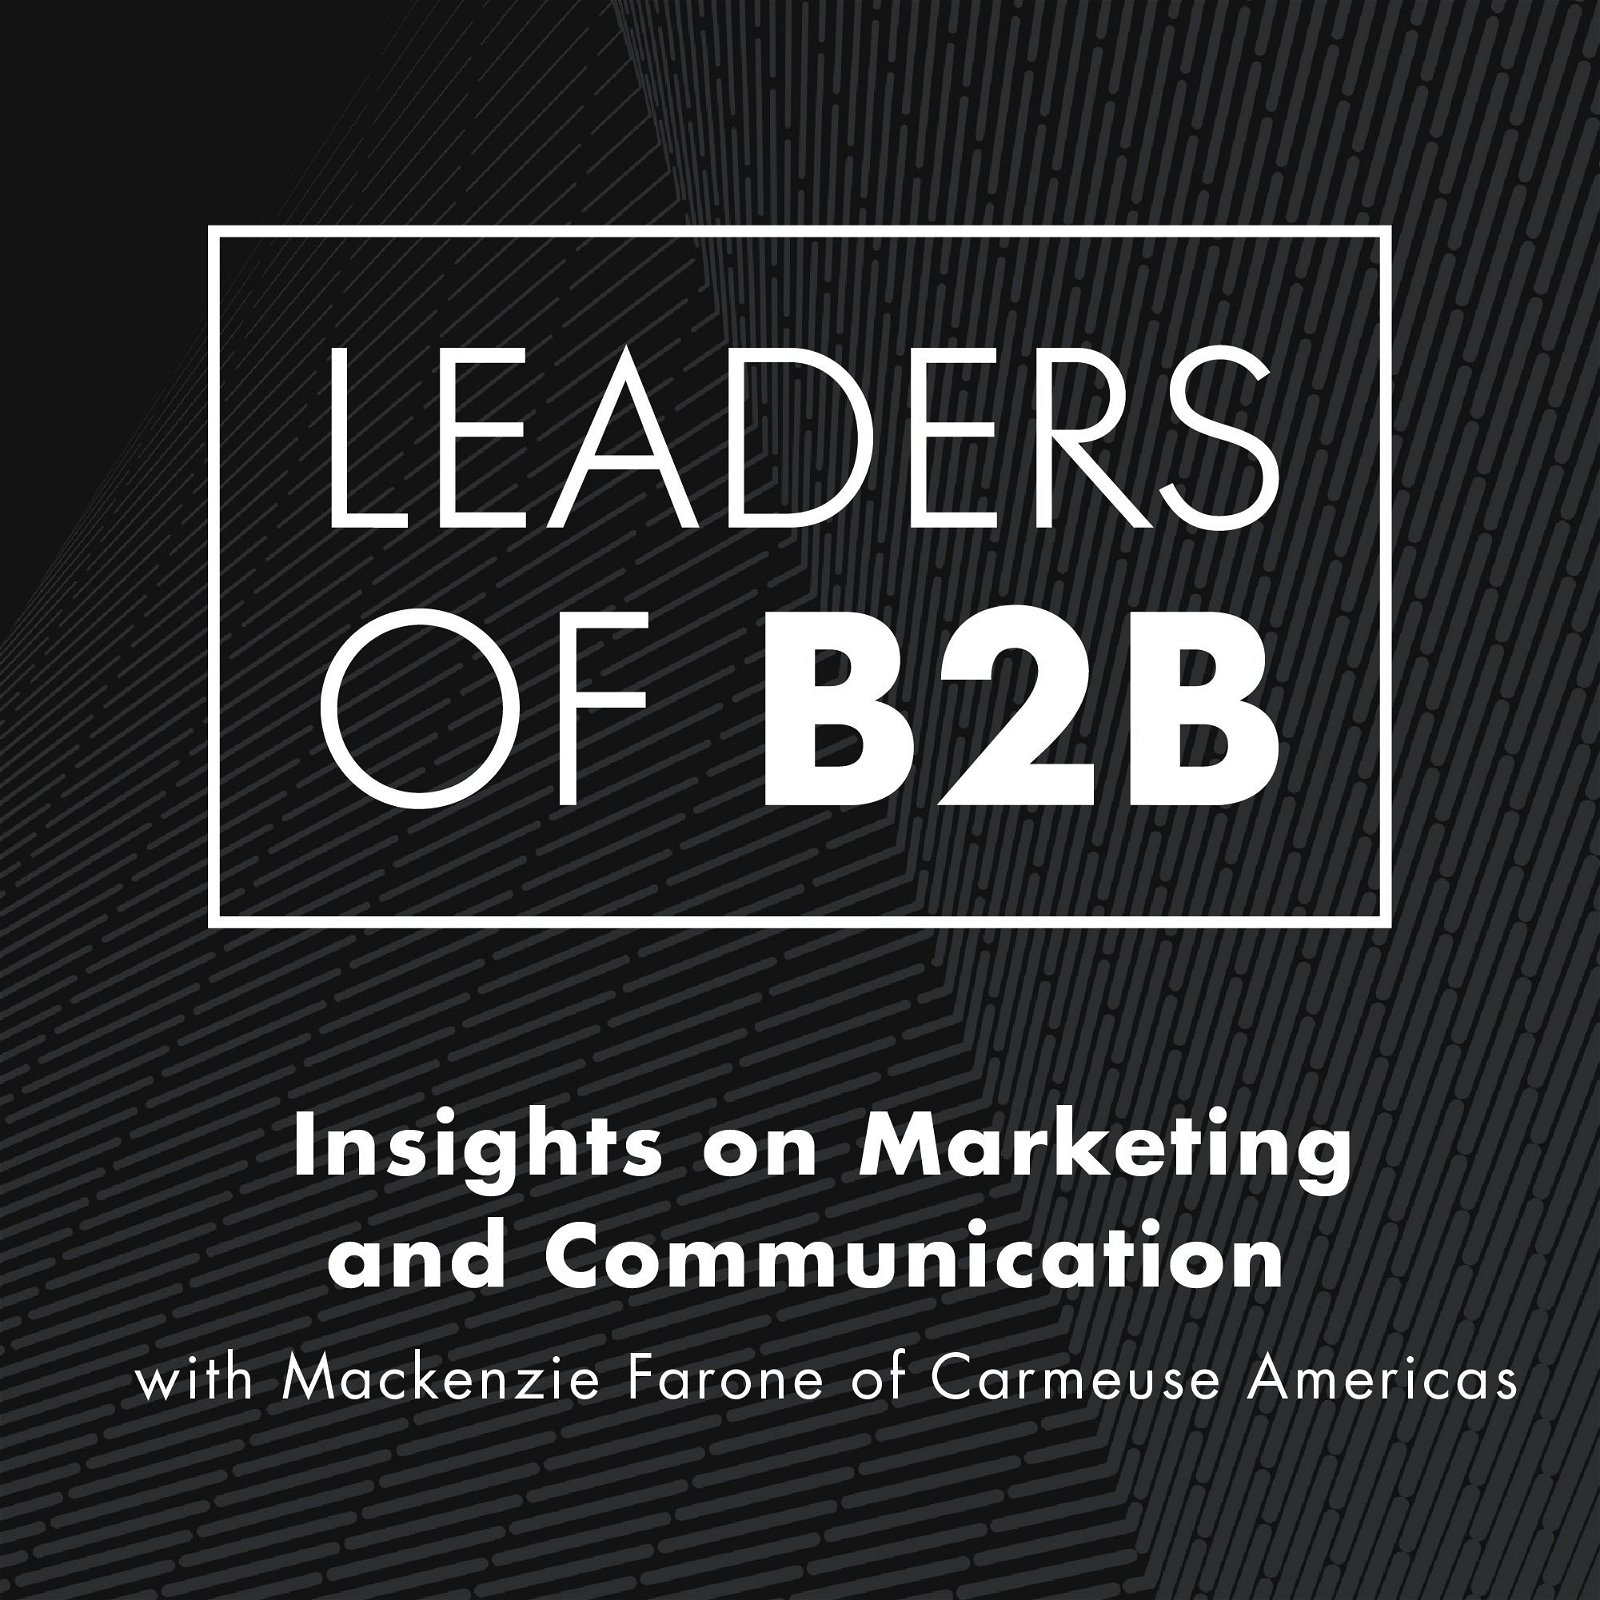 Insights on Marketing and Communication with Mackenzie Farone of Carmeuse Americas